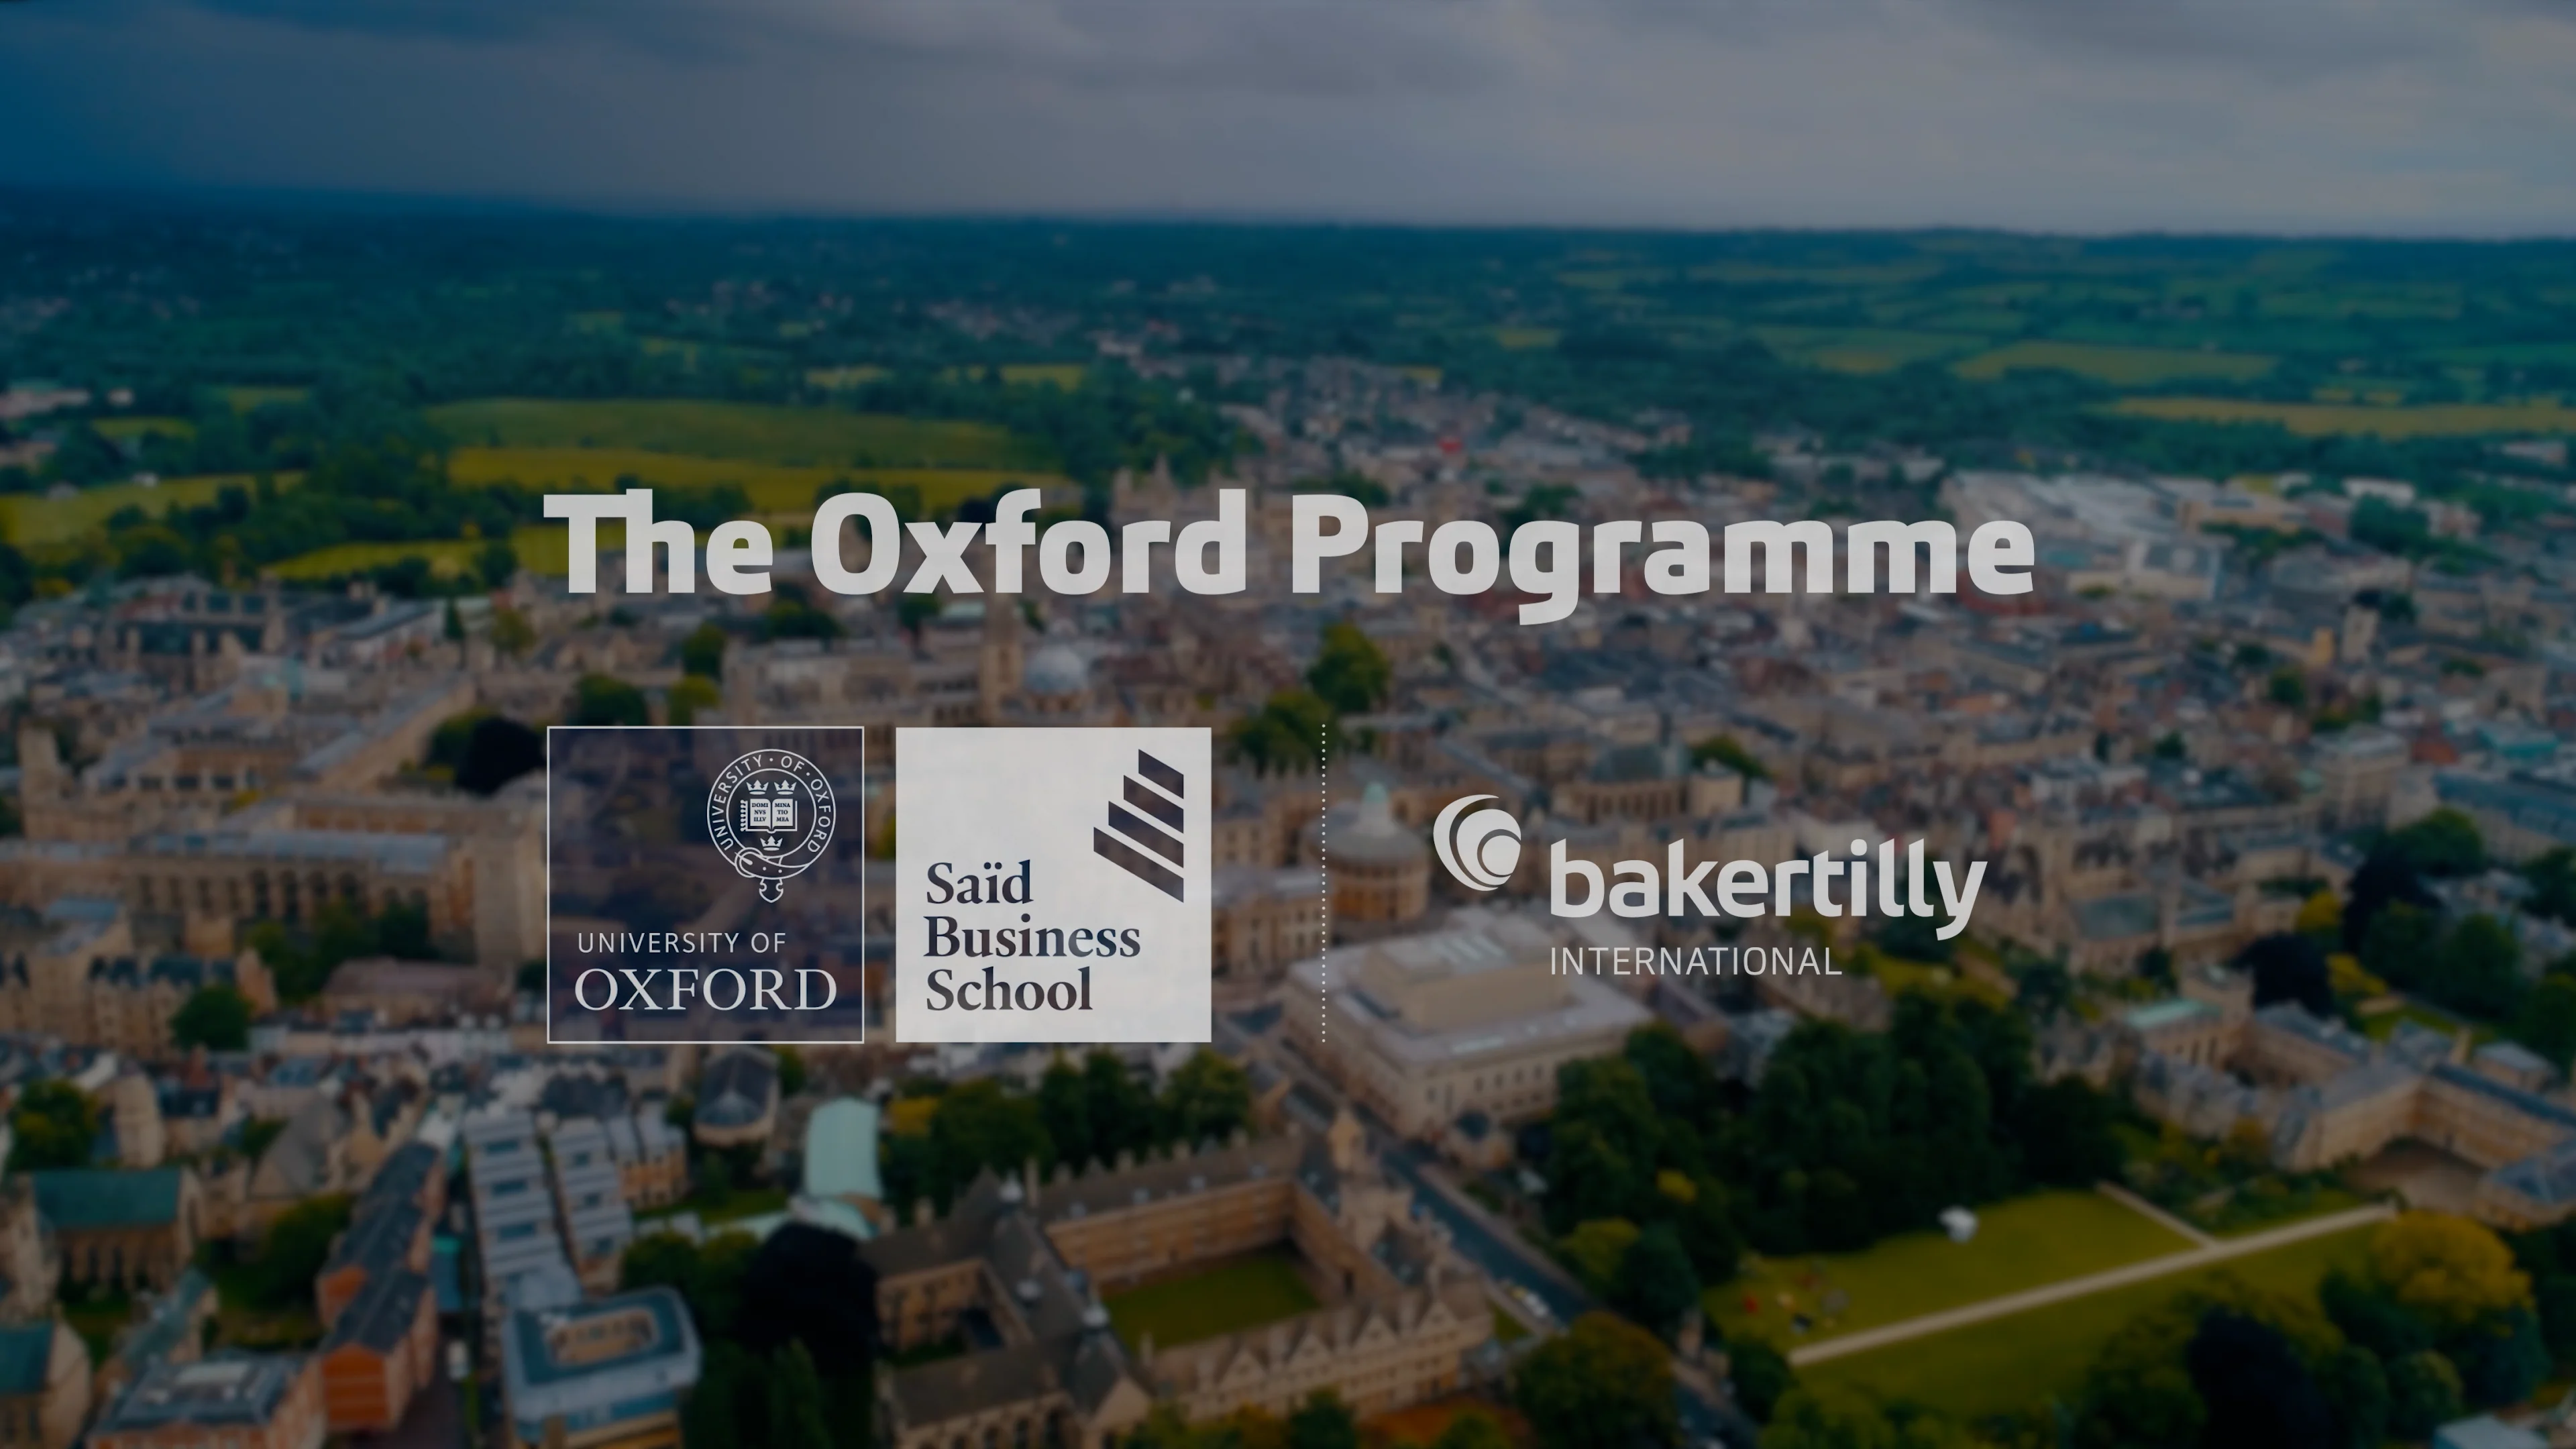 The Oxford Programme